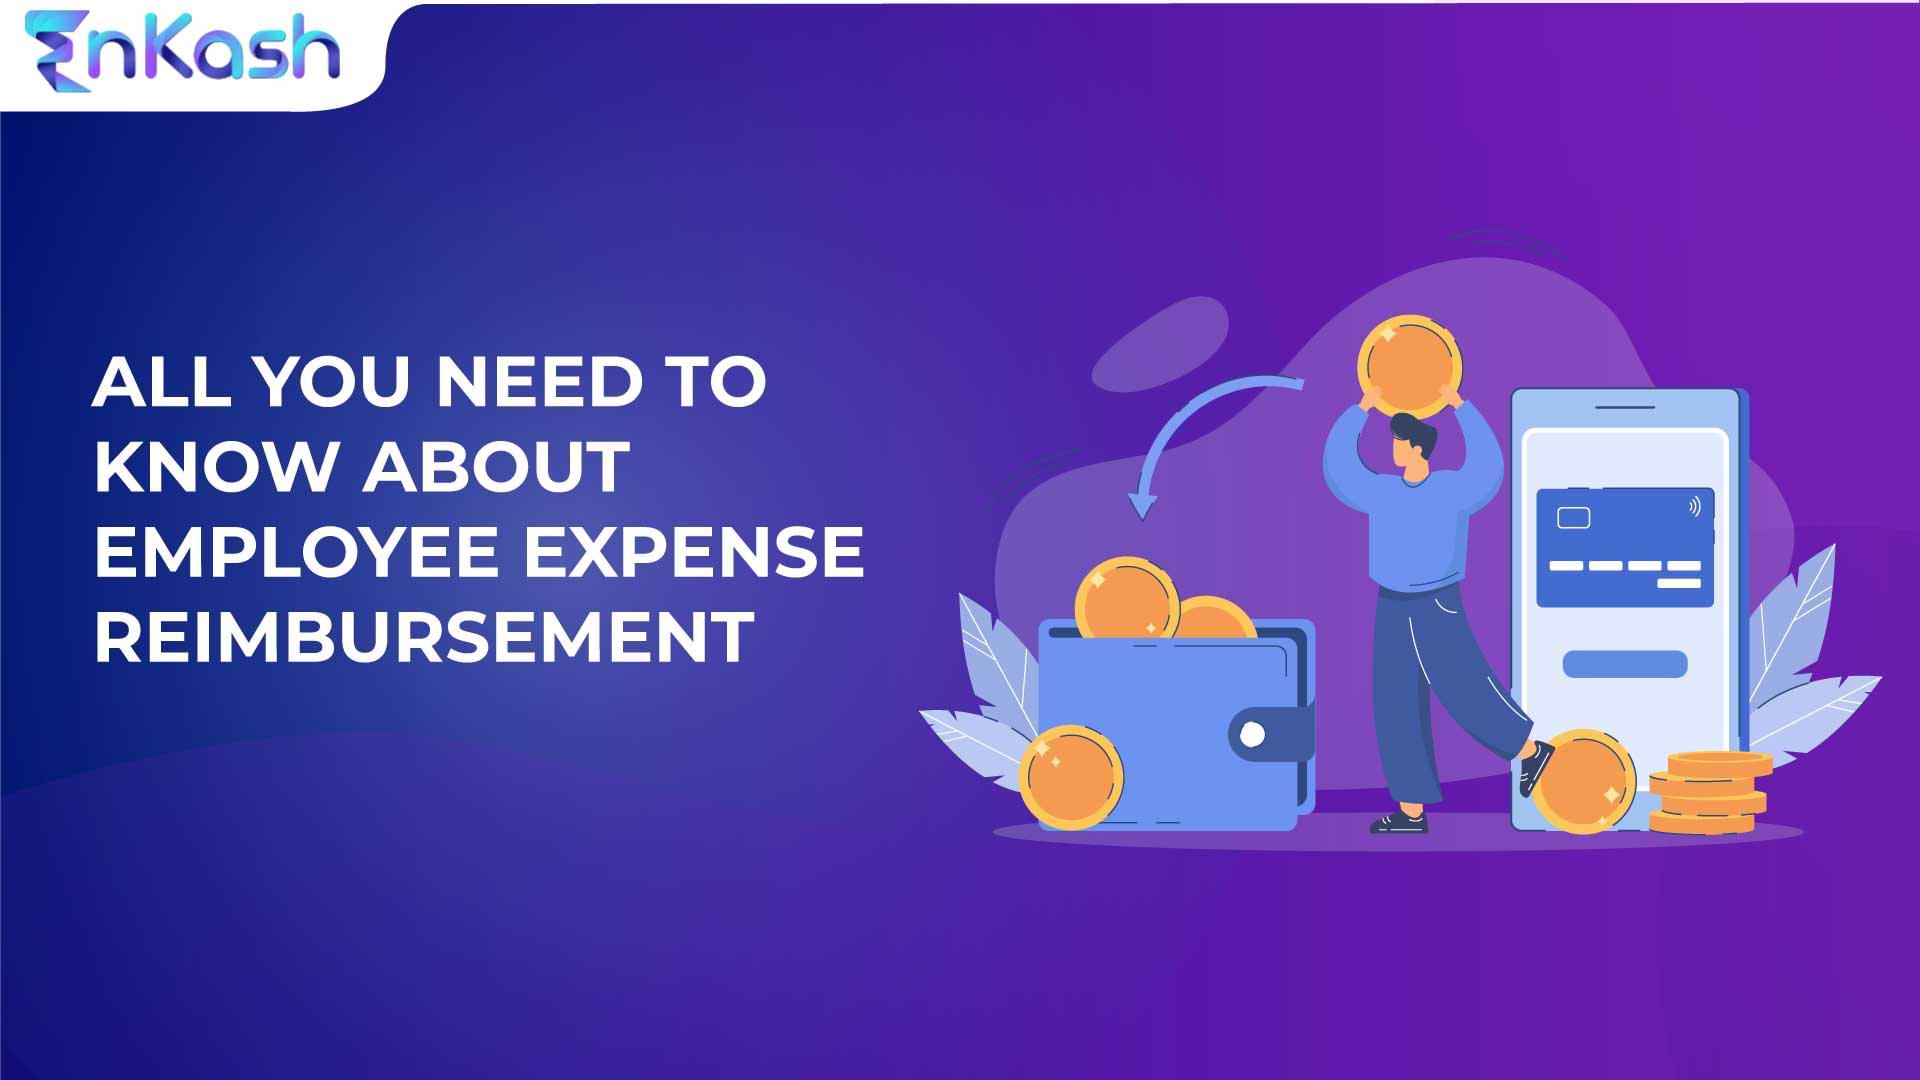 All You Need to Know about Employee Expense Reimbursement